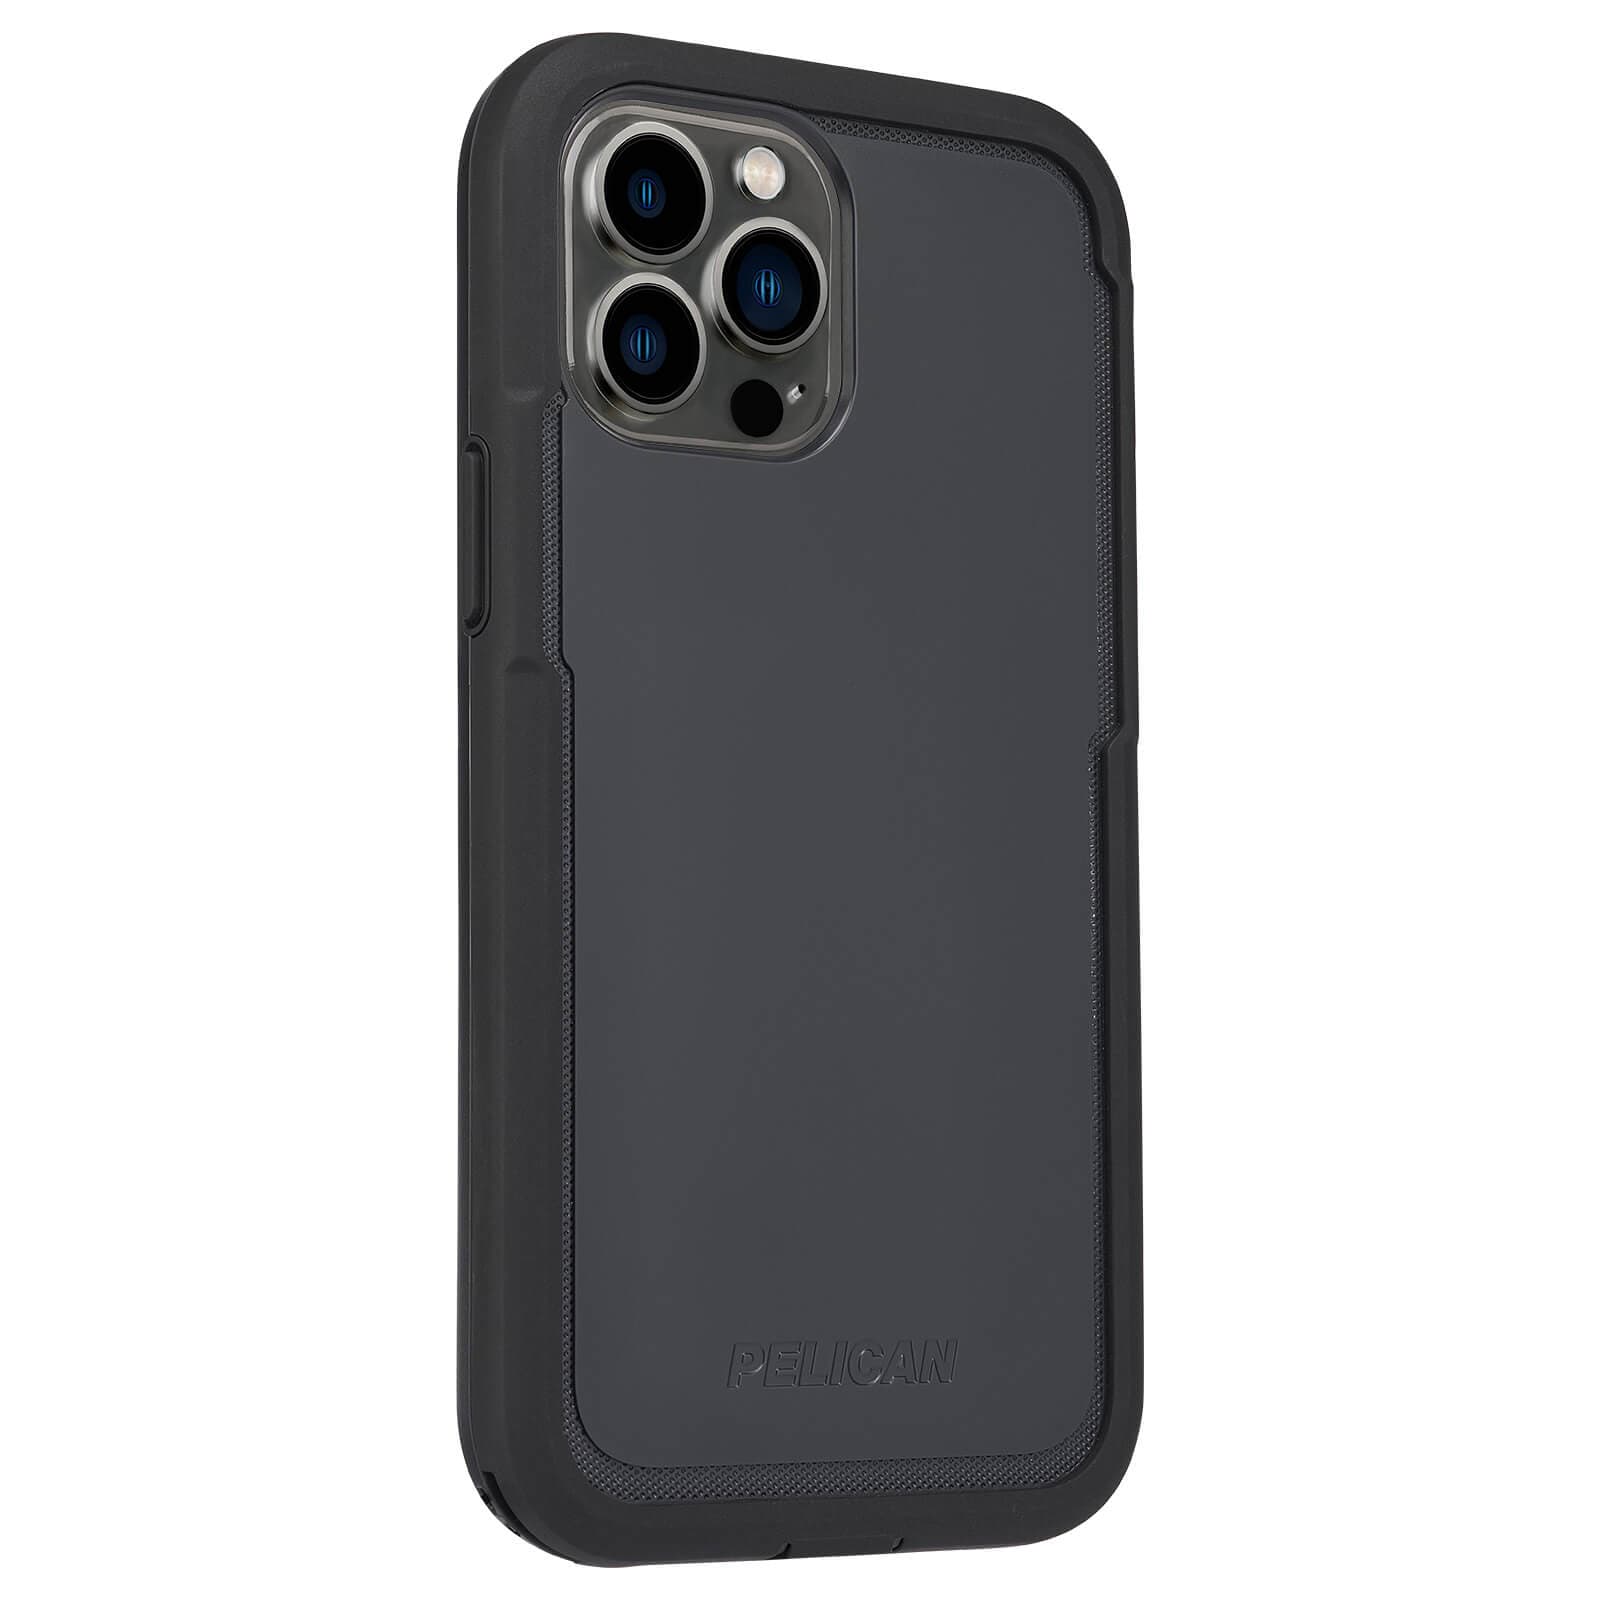 Pelican Marine Active black protective case for iPhone 13 Pro. color::Black